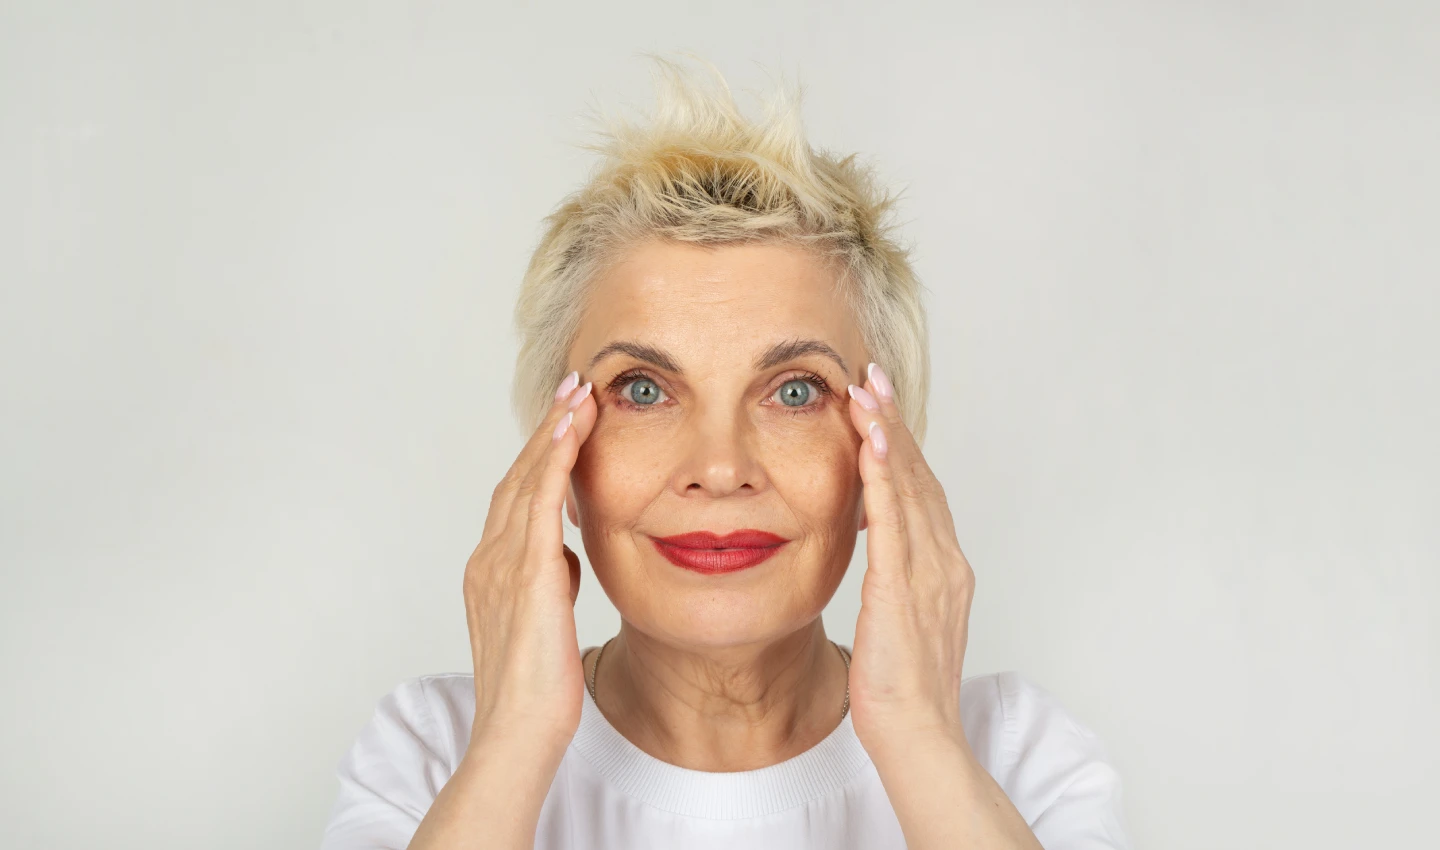 Middle-aged woman with fresh-faced look, demonstrating the power of eye serums for youthful-looking eyes.